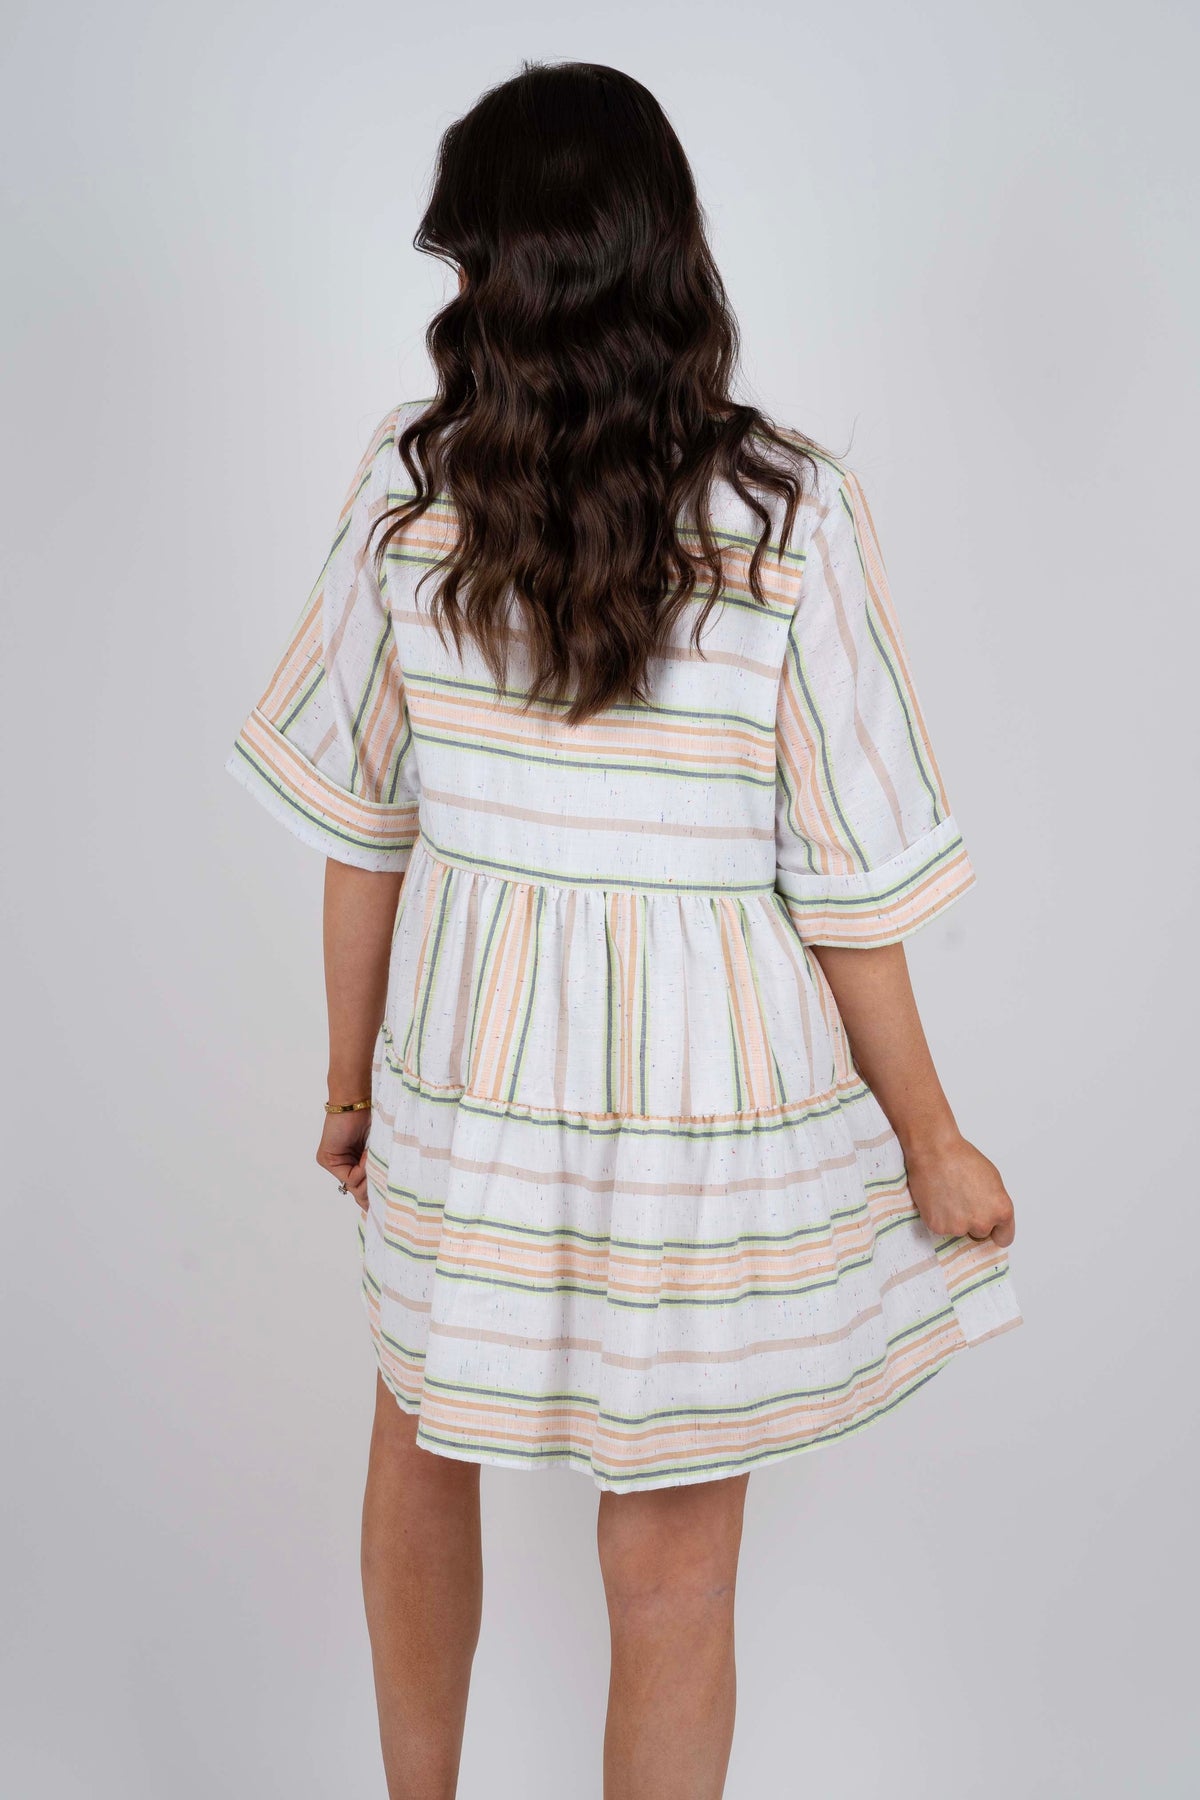 Complete Perfection Dress